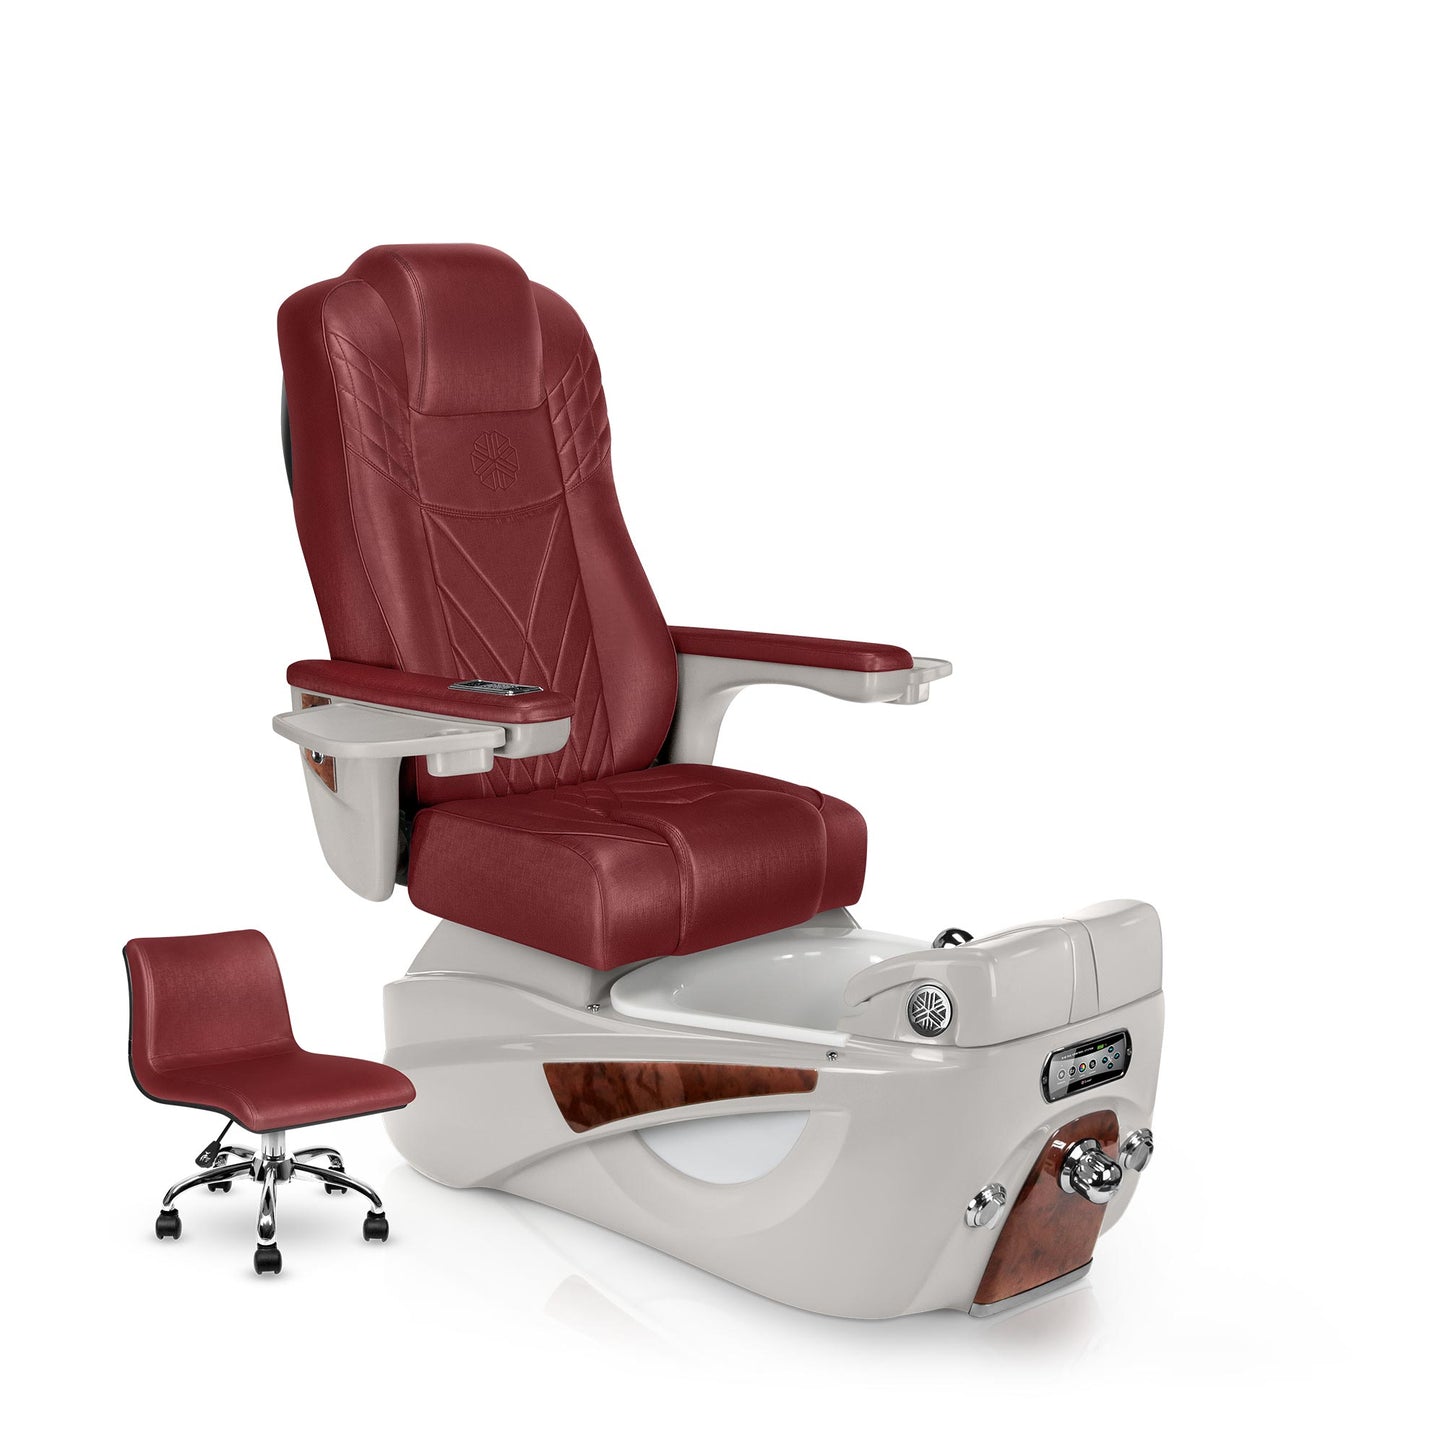 Lexor LUMINOUS pedicure chair with ruby cushion and sandstone spa base